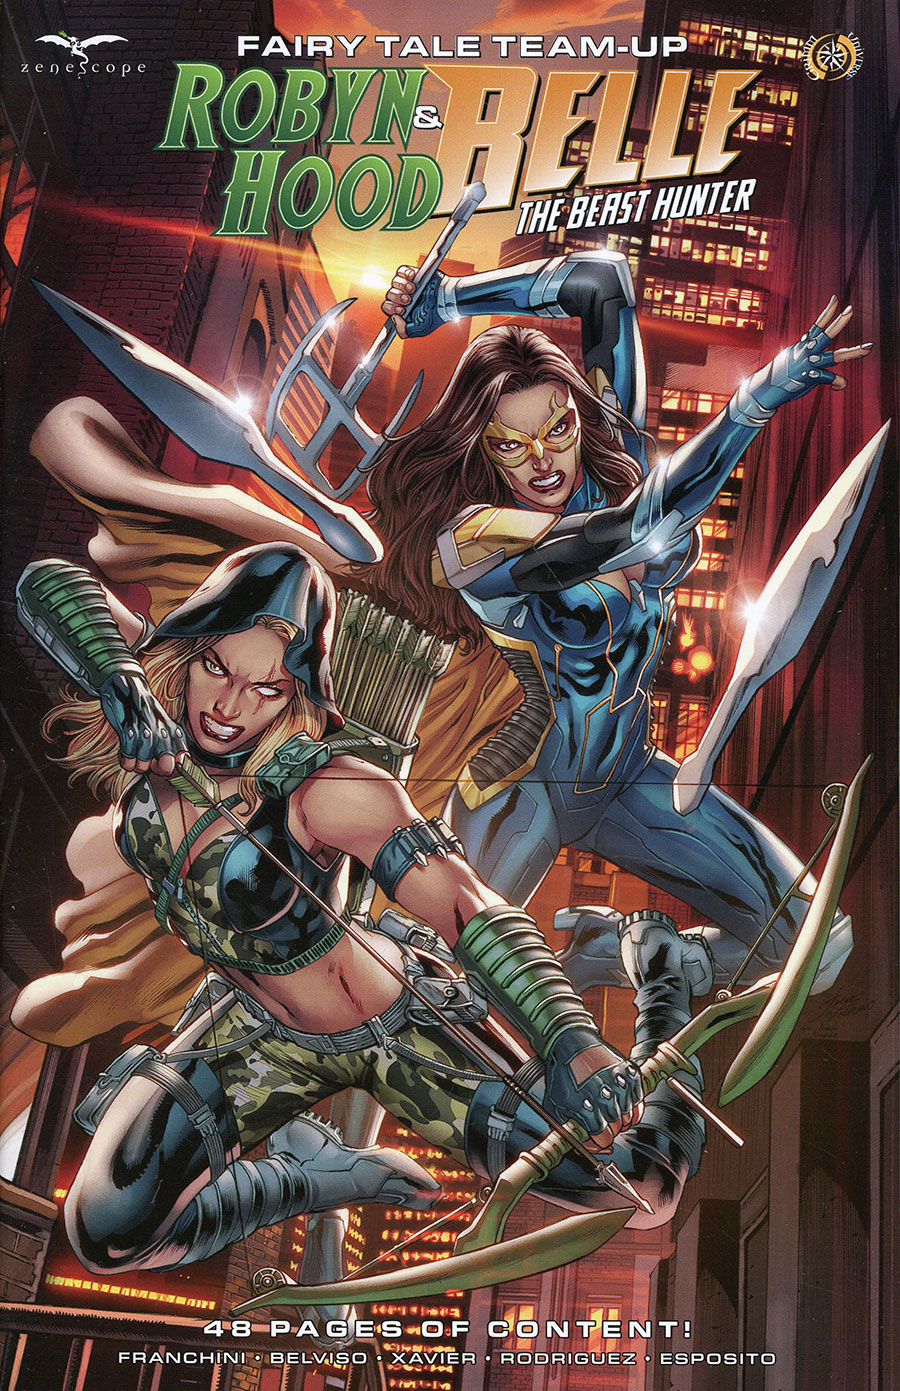 Grimm Fairy Tales Presents Fairy Tale Team-Up Robyn Hood & Belle The Beast Hunter #1 (One Shot) Cover B Igor Vitorino